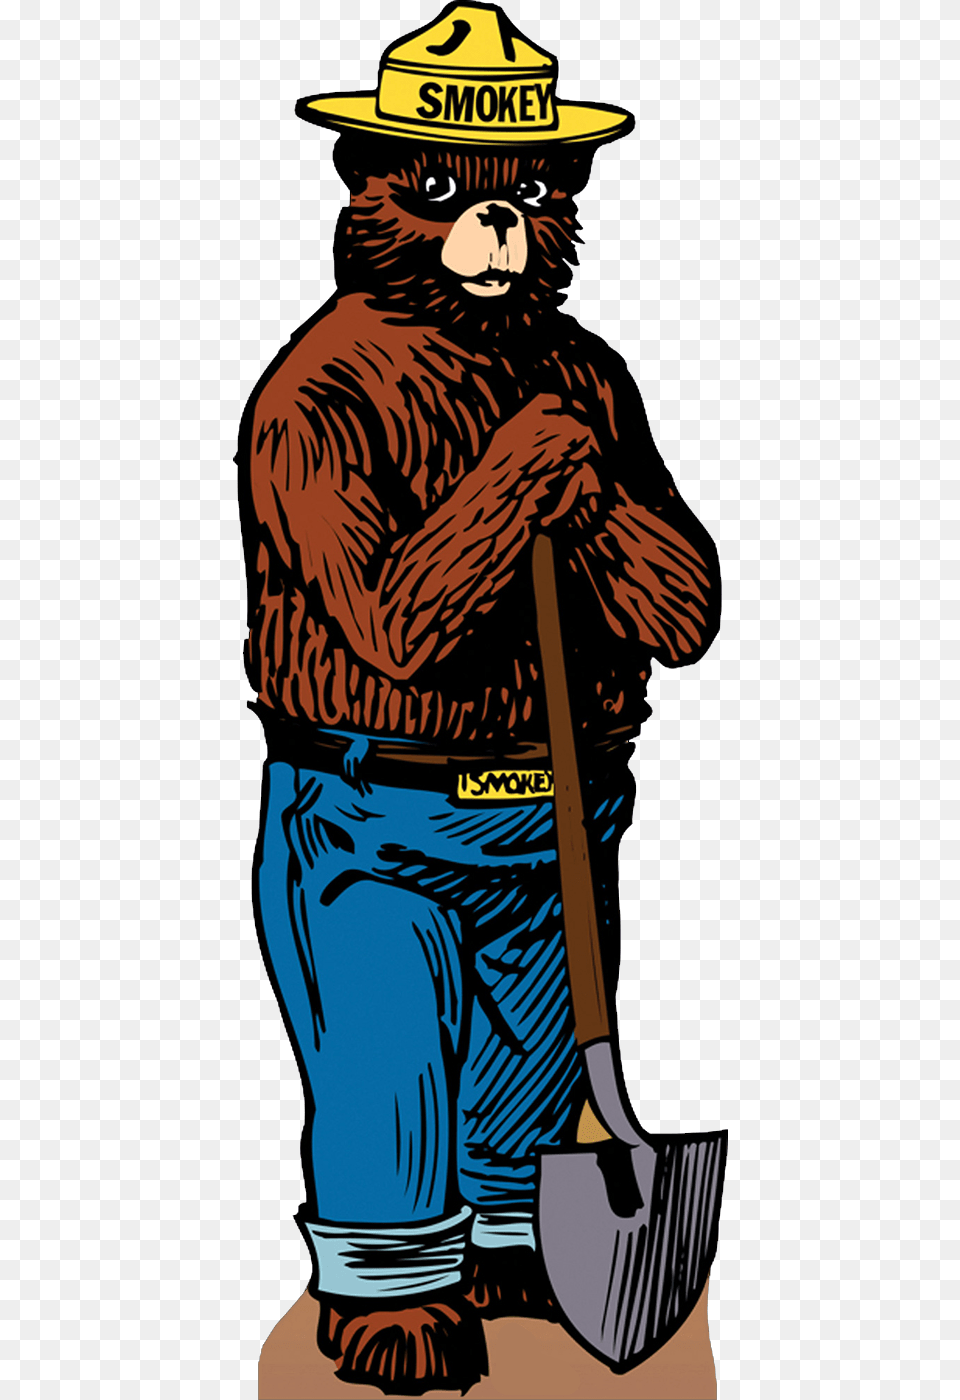 Smokey The Bear Only You Can Prevent Forest Fires Defunded, Adult, Male, Man, Person Png Image